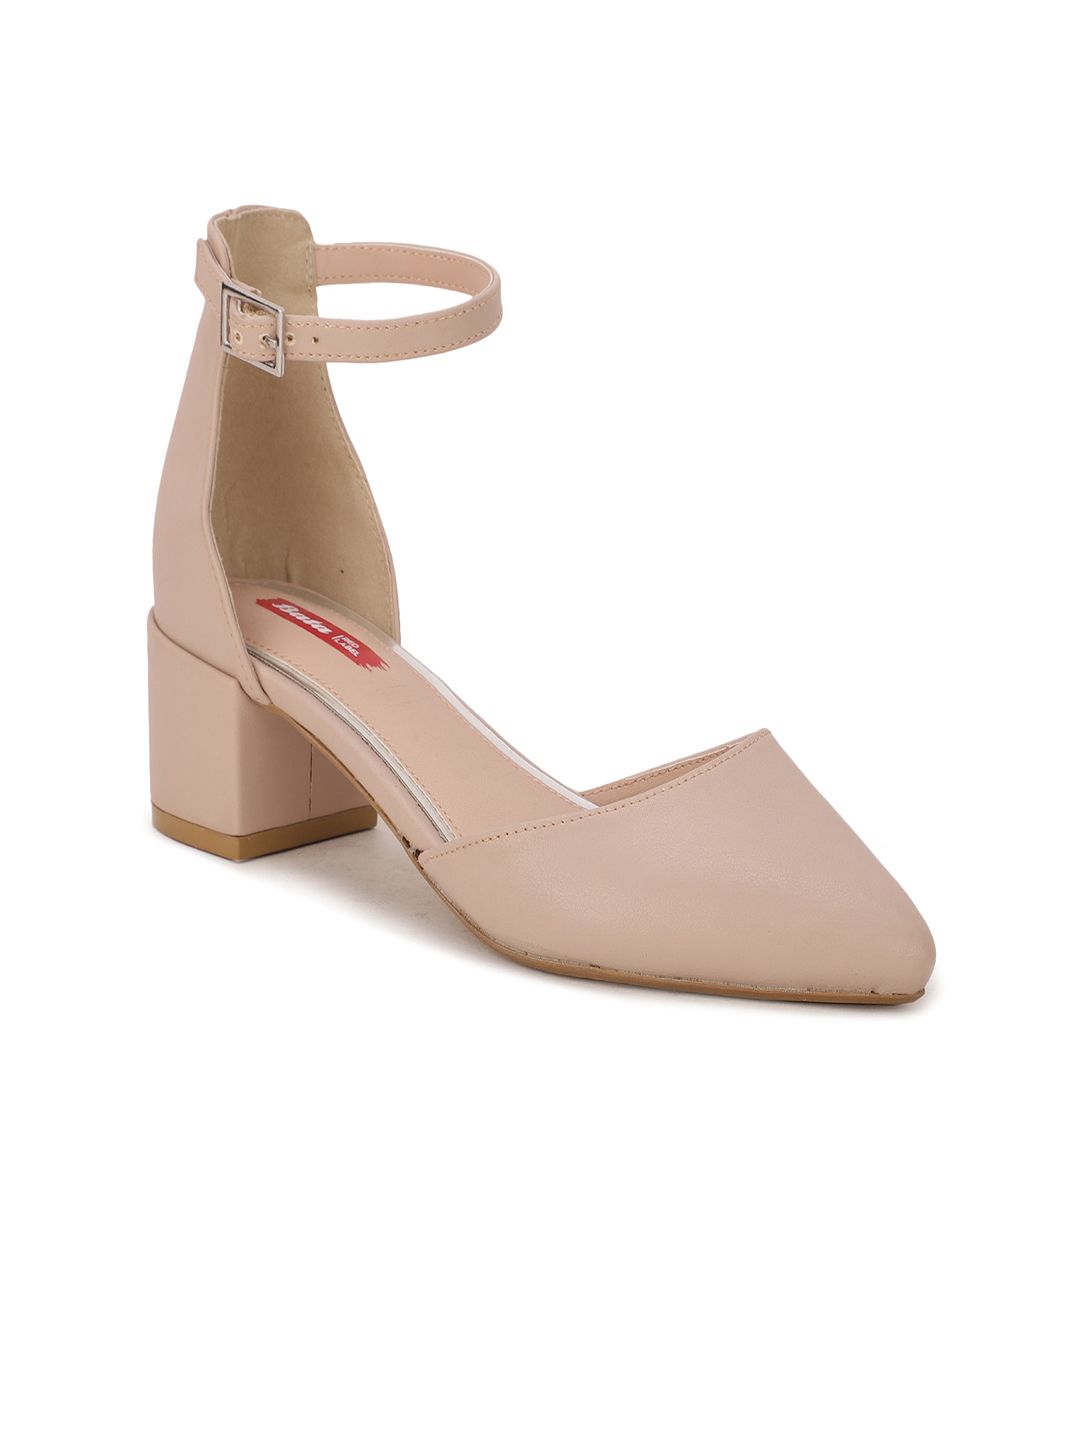 Bata Beige Solid PU Block Pumps with Buckles Price in India